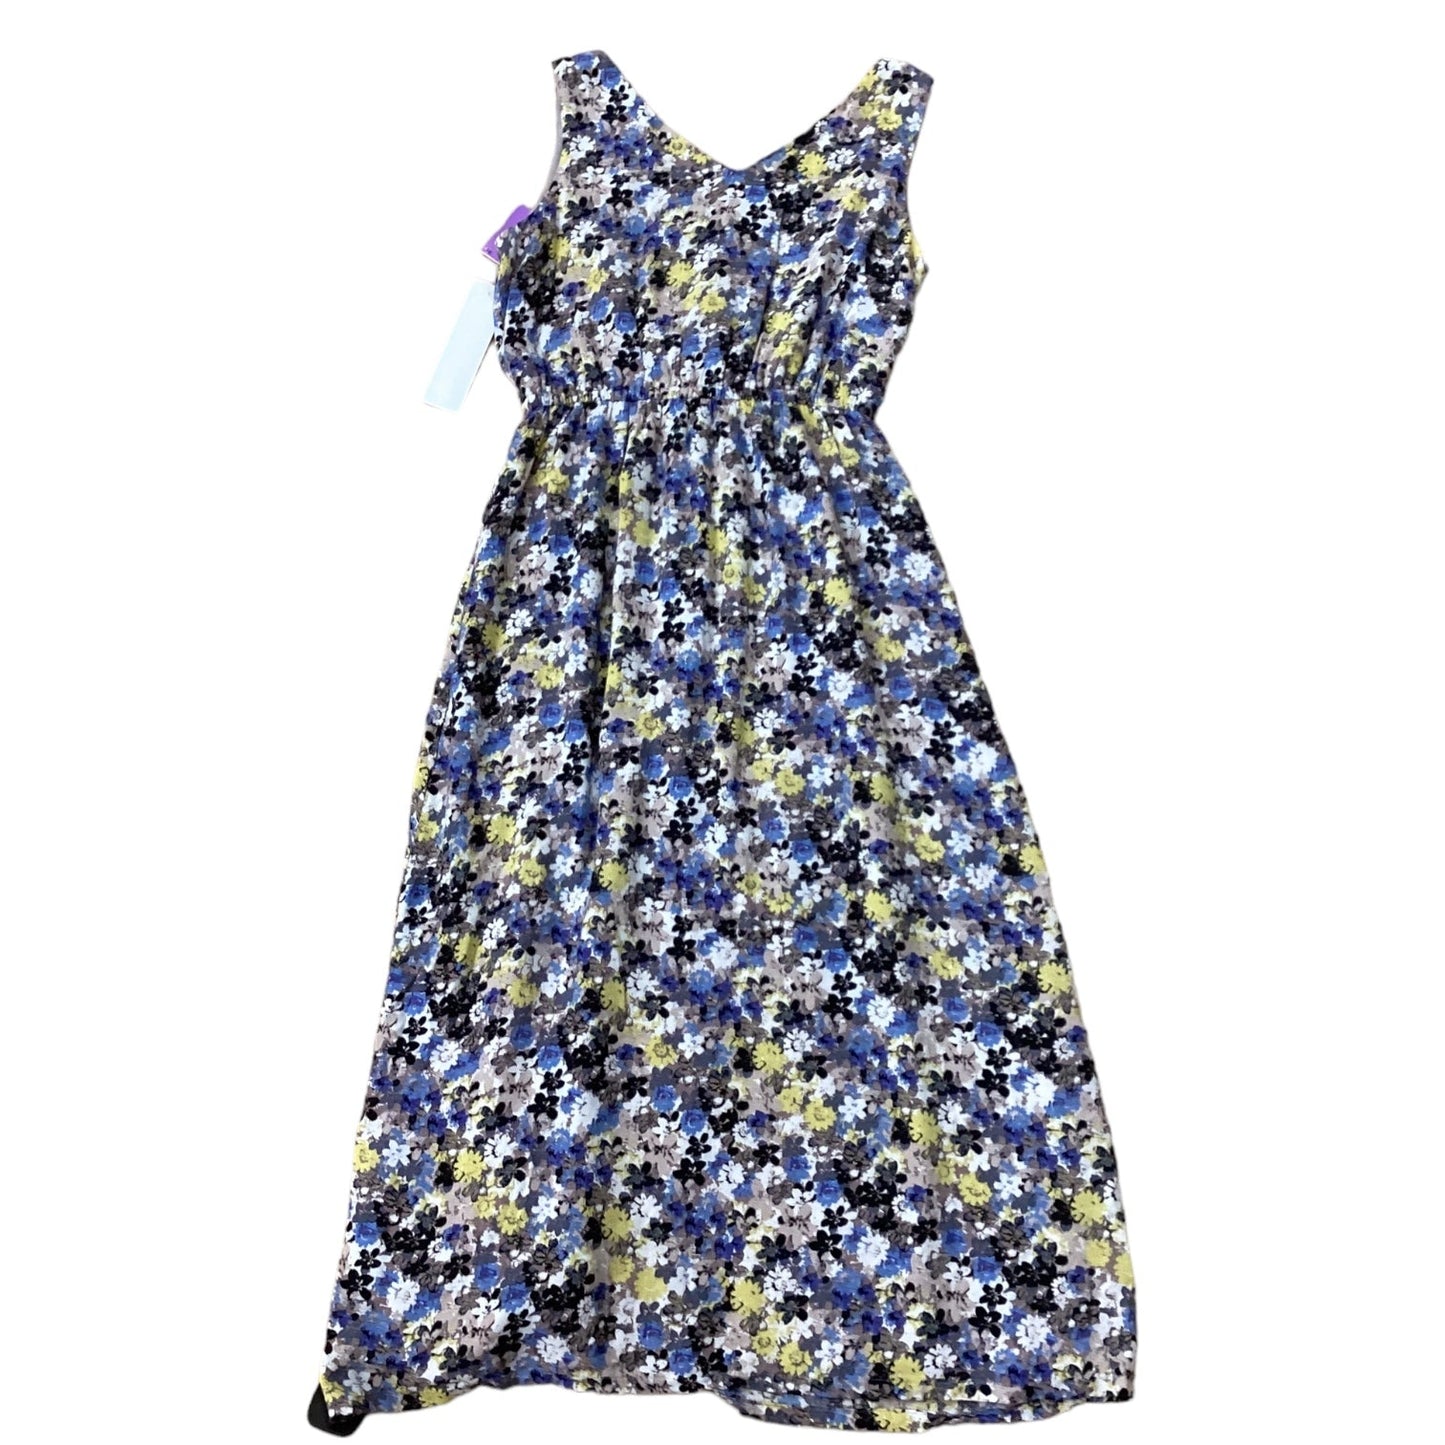 Floral Print Dress Casual Midi Lucky Brand, Size S